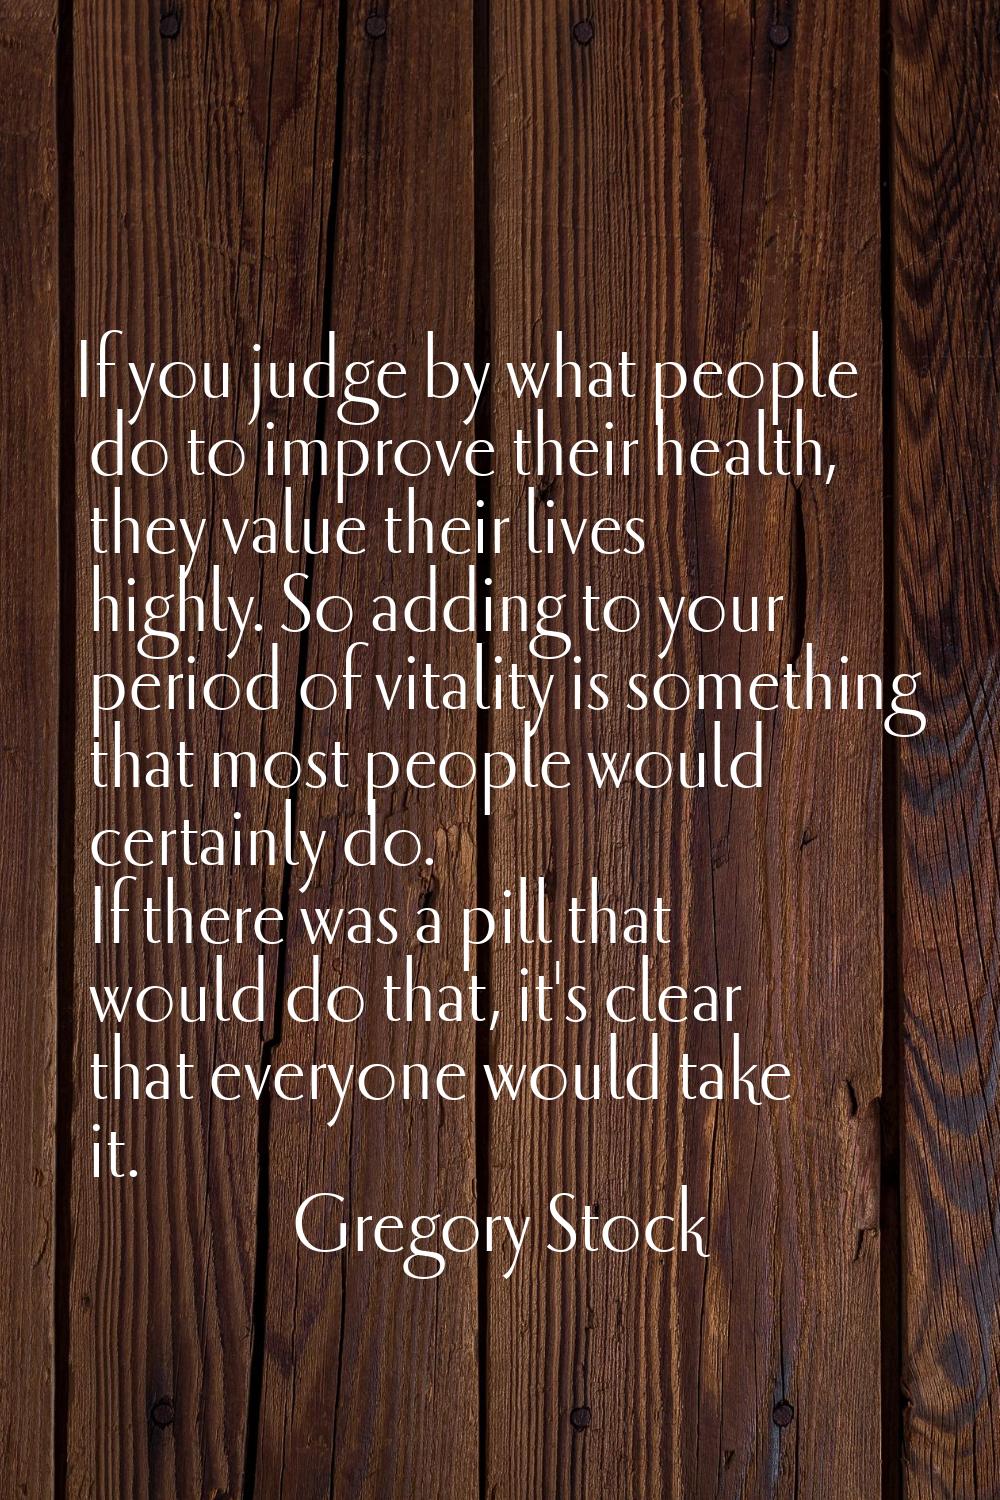 If you judge by what people do to improve their health, they value their lives highly. So adding to